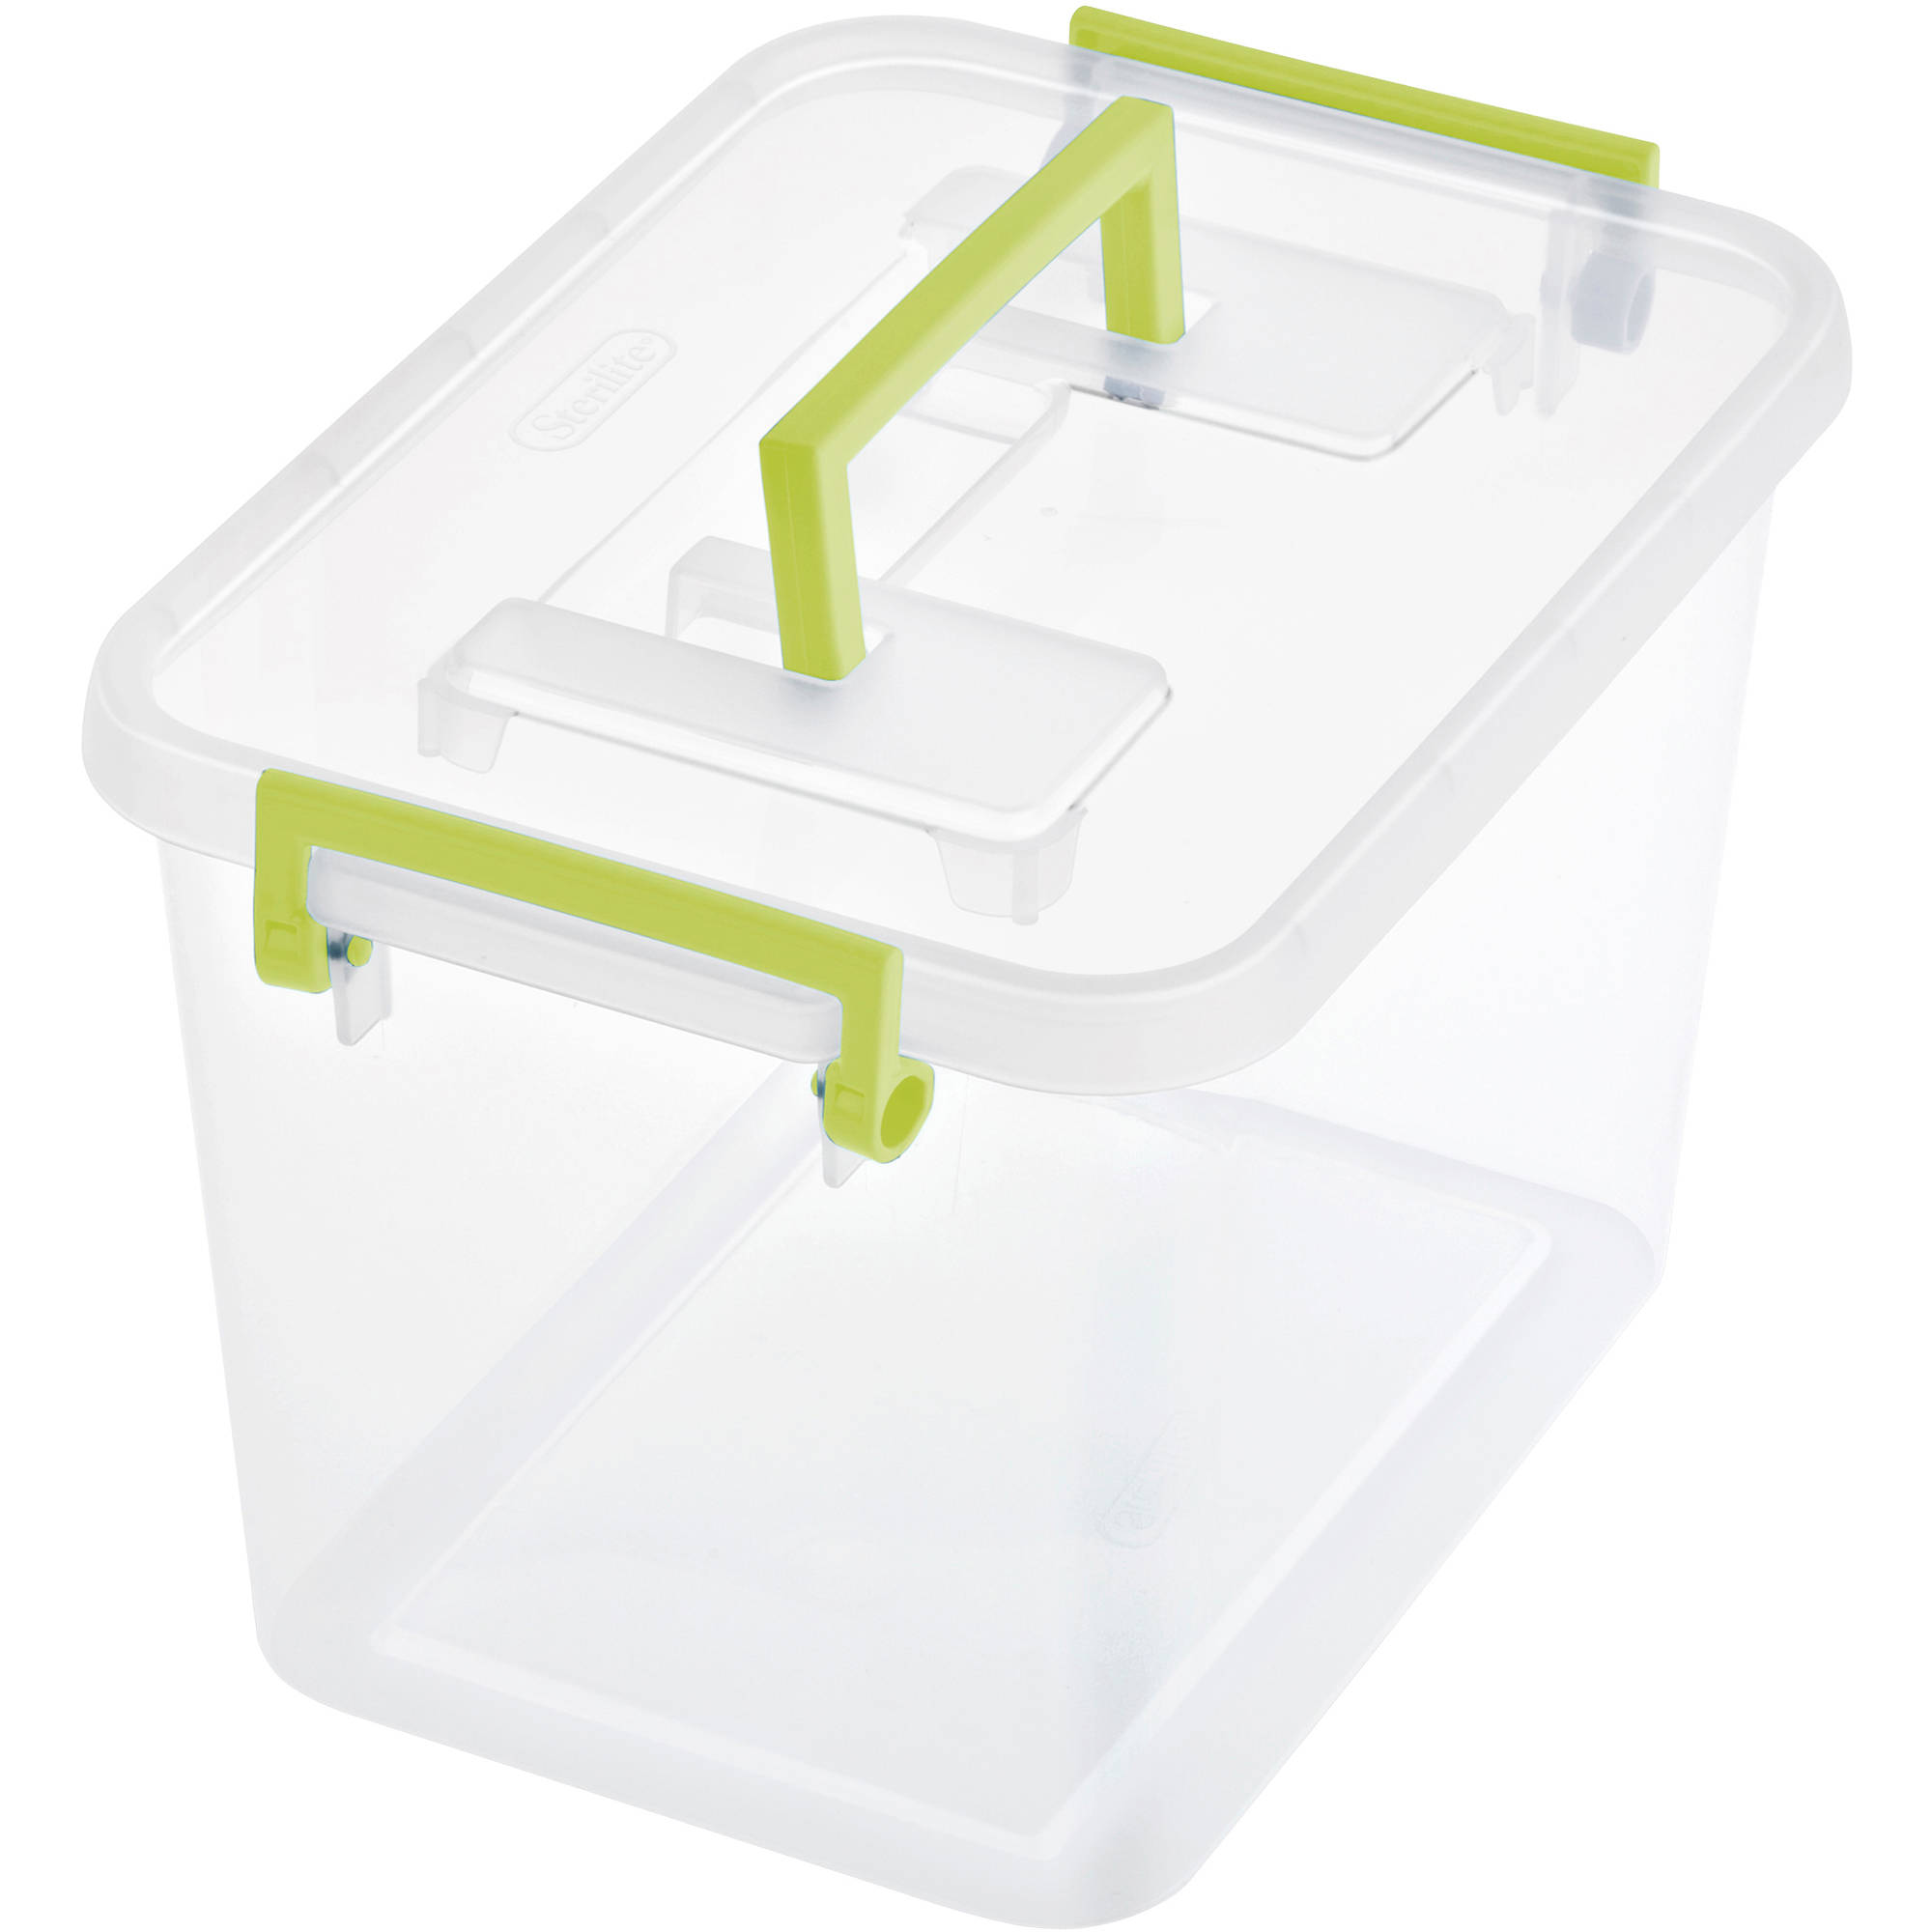 Sterilite 7.2 Quart Modular Latch Box- Bamboo Grass (Available in Case of 6 or Single Unit) - image 1 of 1